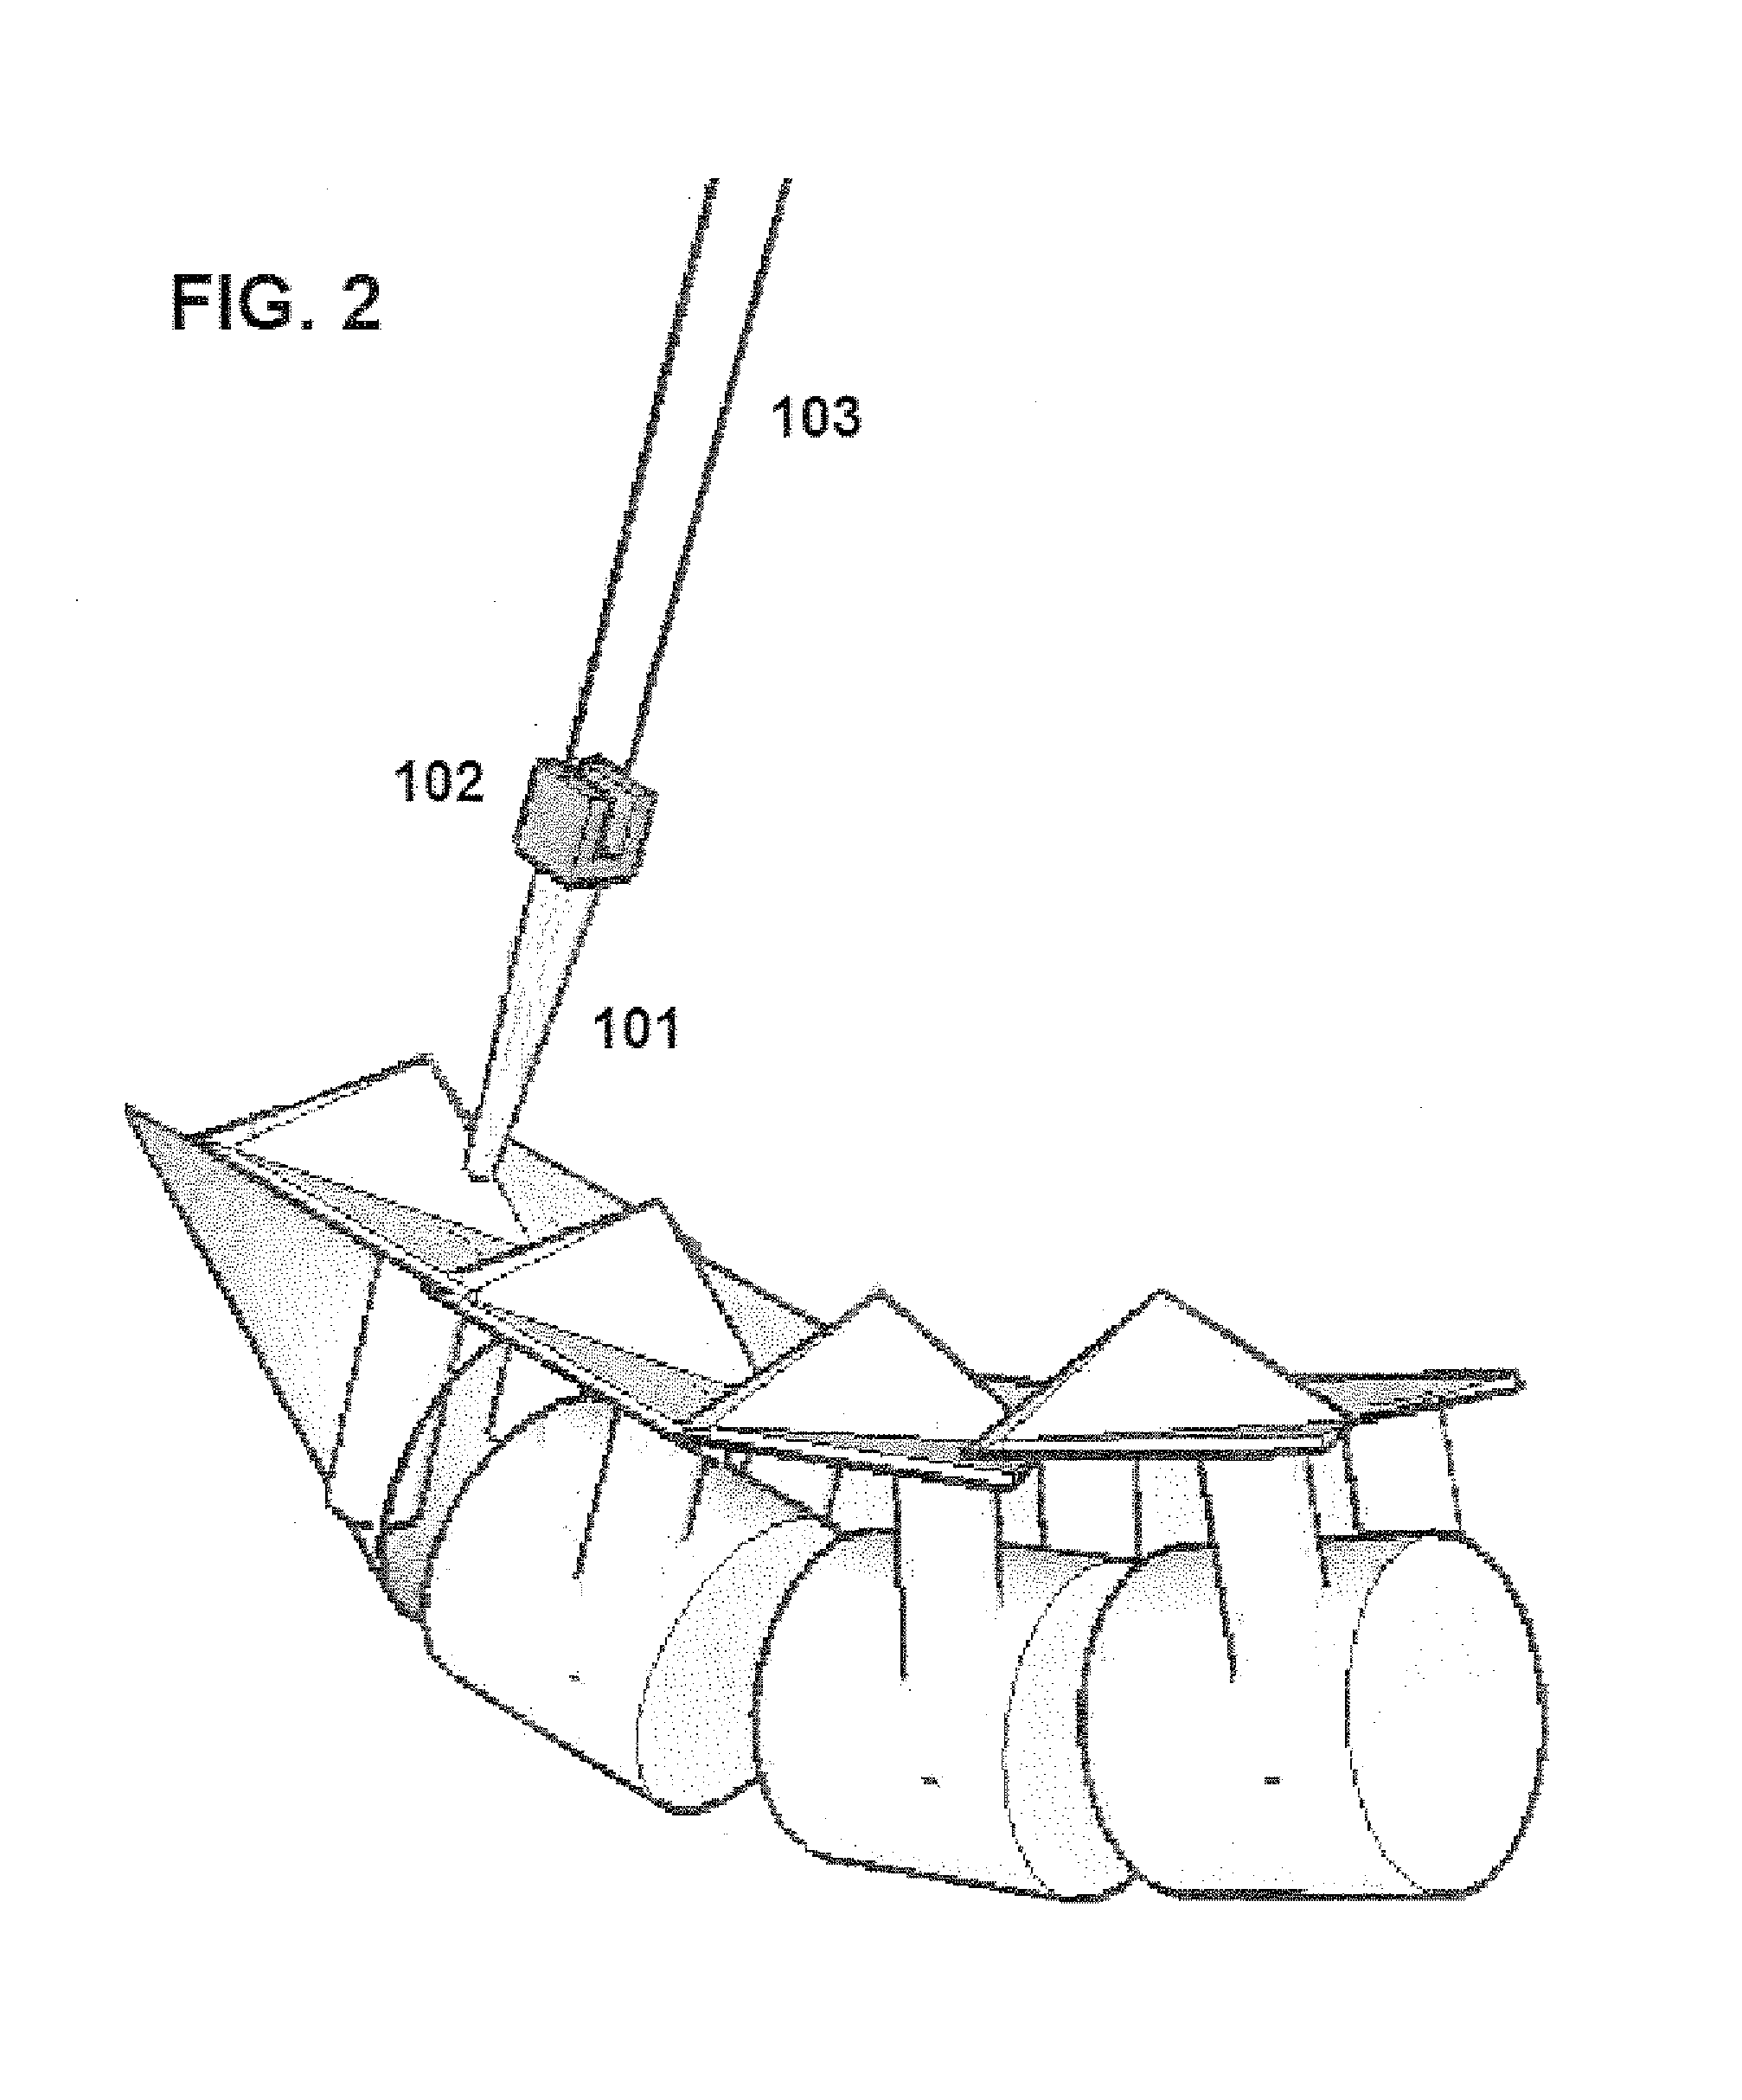 System and method for wire-guided pedicle screw stabilization of spinal vertebrae